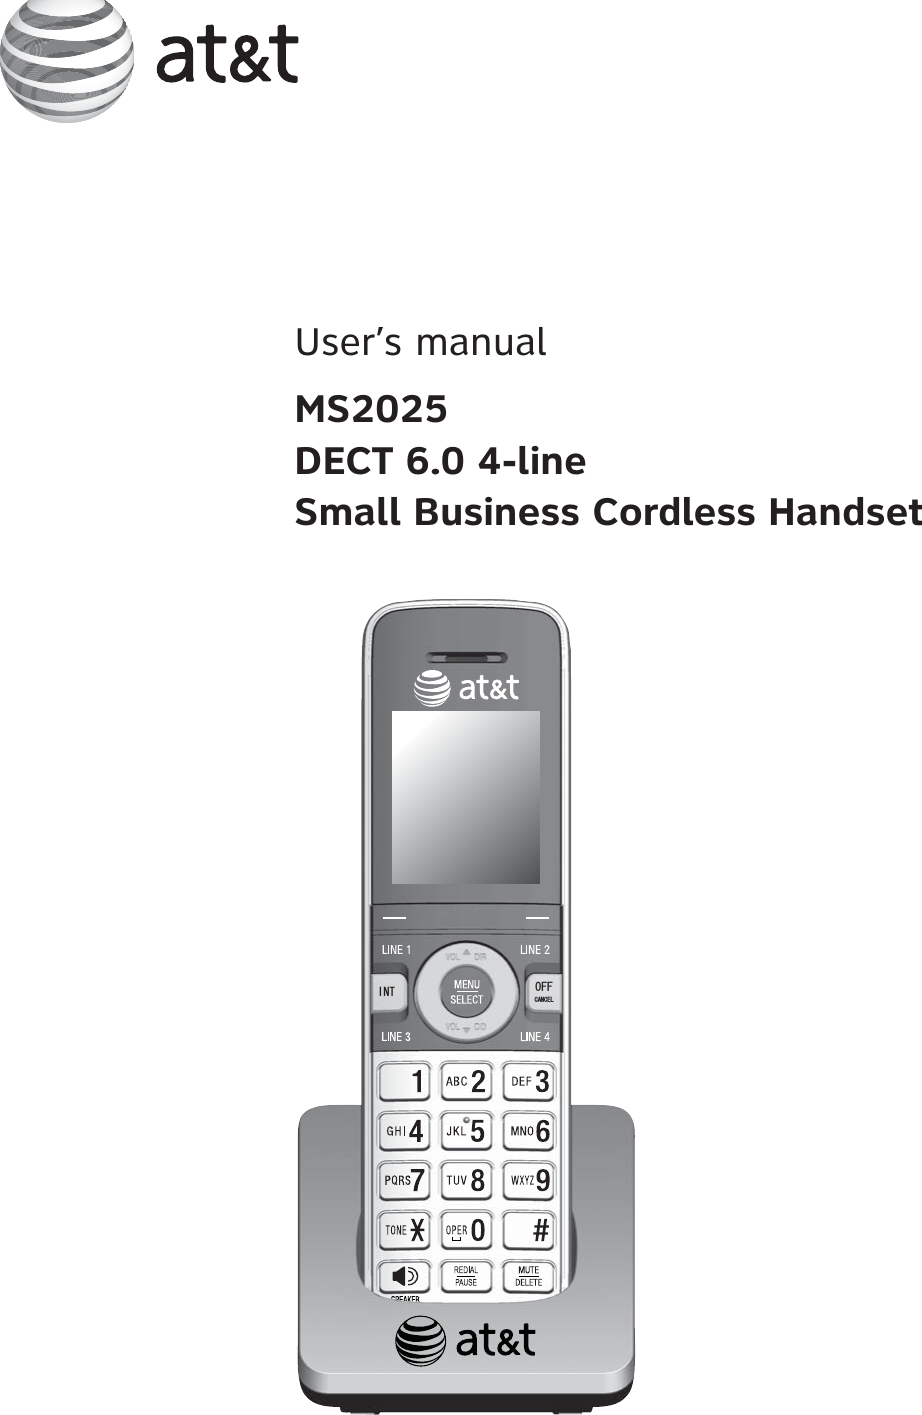 User’s manualMS2025DECT 6.0 4-lineSmall Business Cordless Handset+06 1((%#0%&apos;.